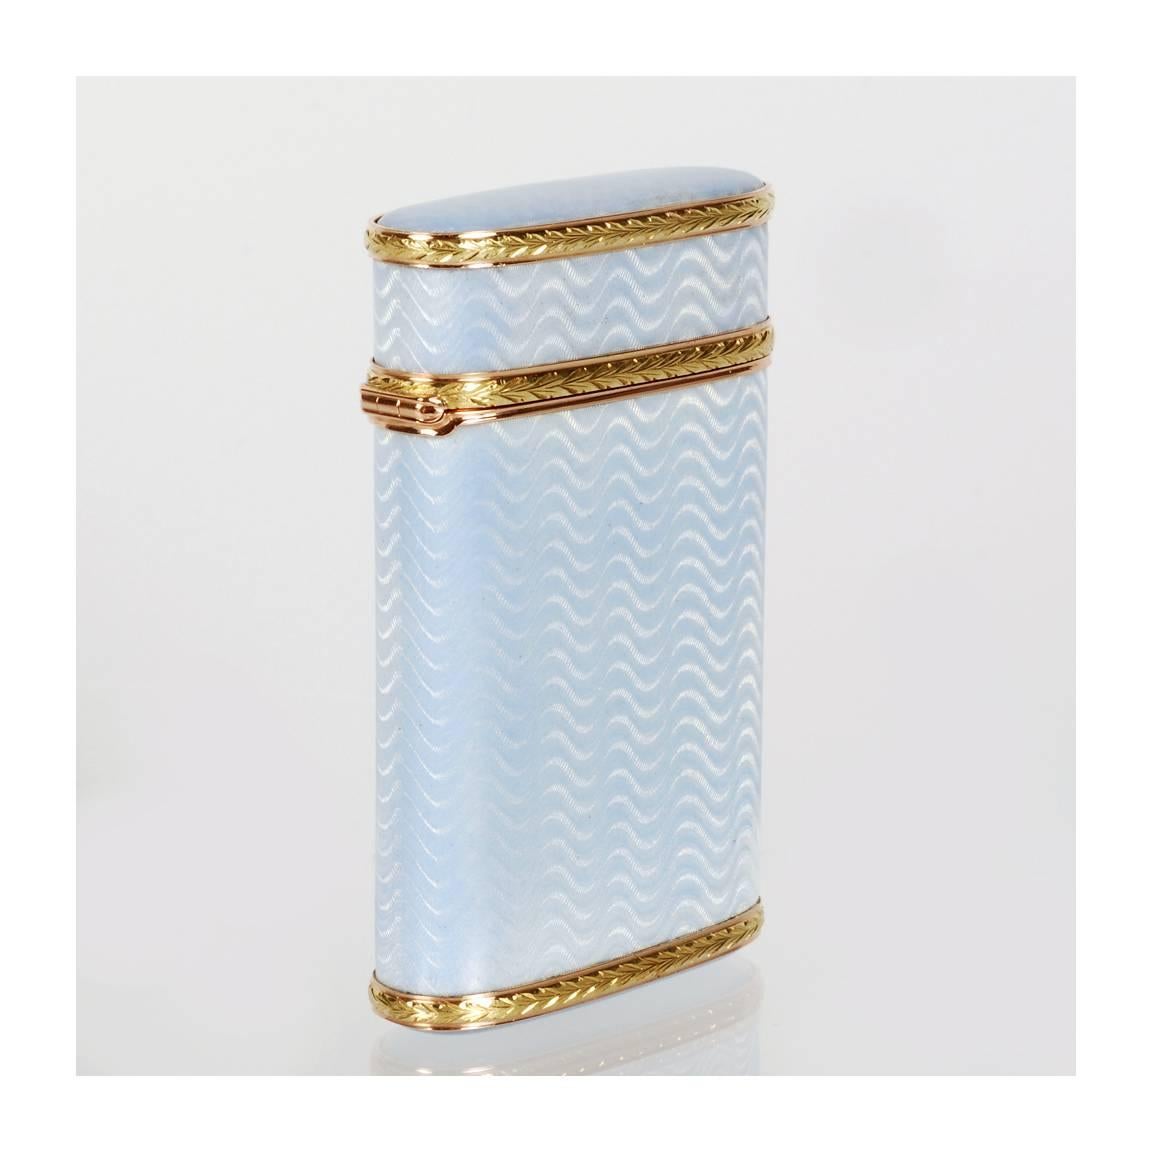 A Russian two-color gold mounted silver and guilloché enamel cigarette case by Andrei Adler, retailed by the firm of Sumin, St. Petersburg, 1908-1913. The case of upright oval form with hinged lid, enameled pale blue translucent enamel over a wavy